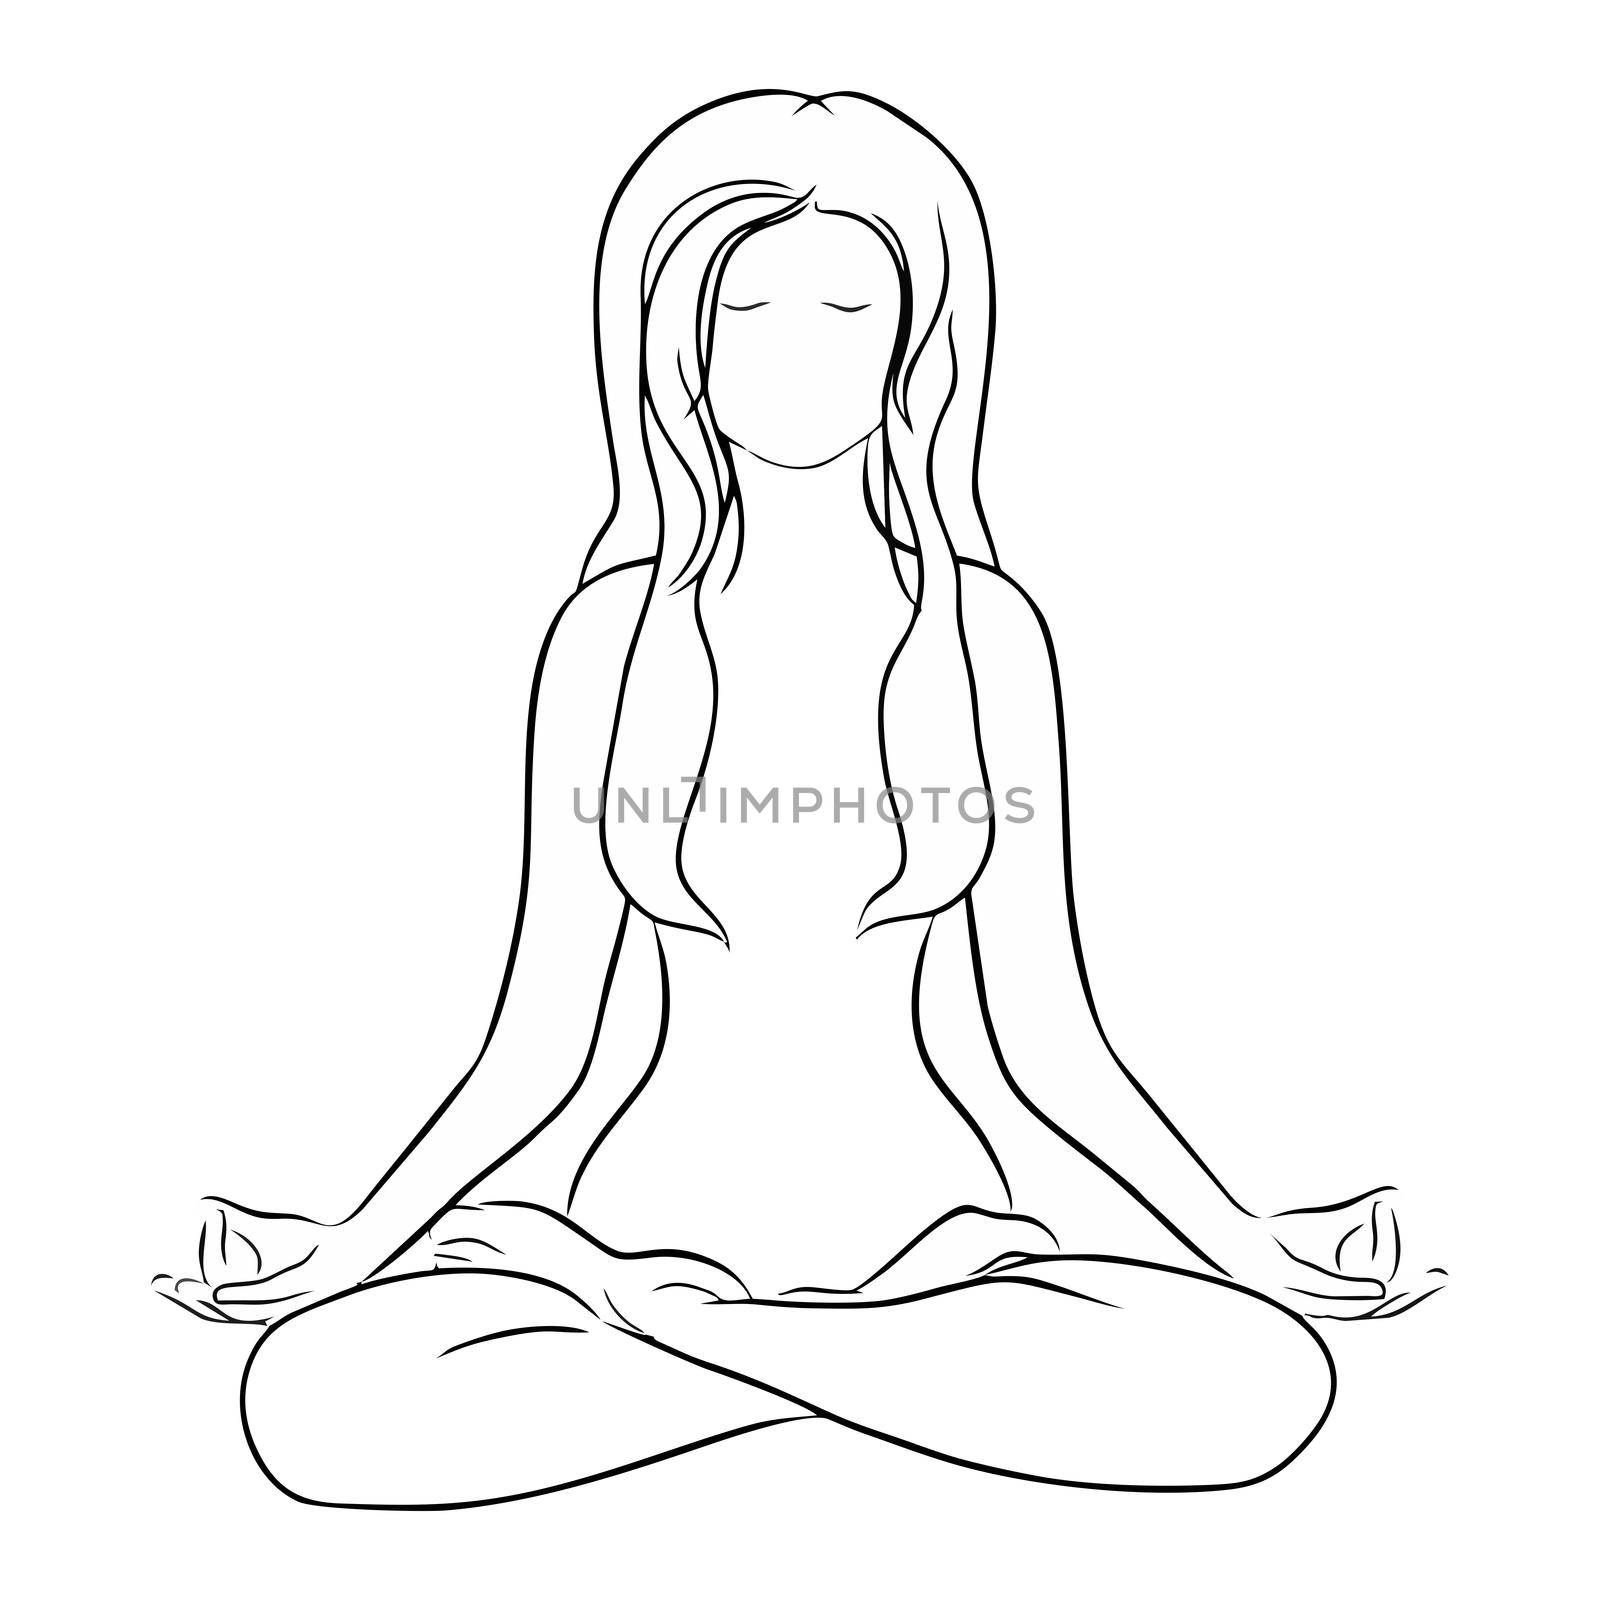 Yoga, beauty salon, spa logo or label or label. A girl sitting in the lotus position. by Alina_Lebed